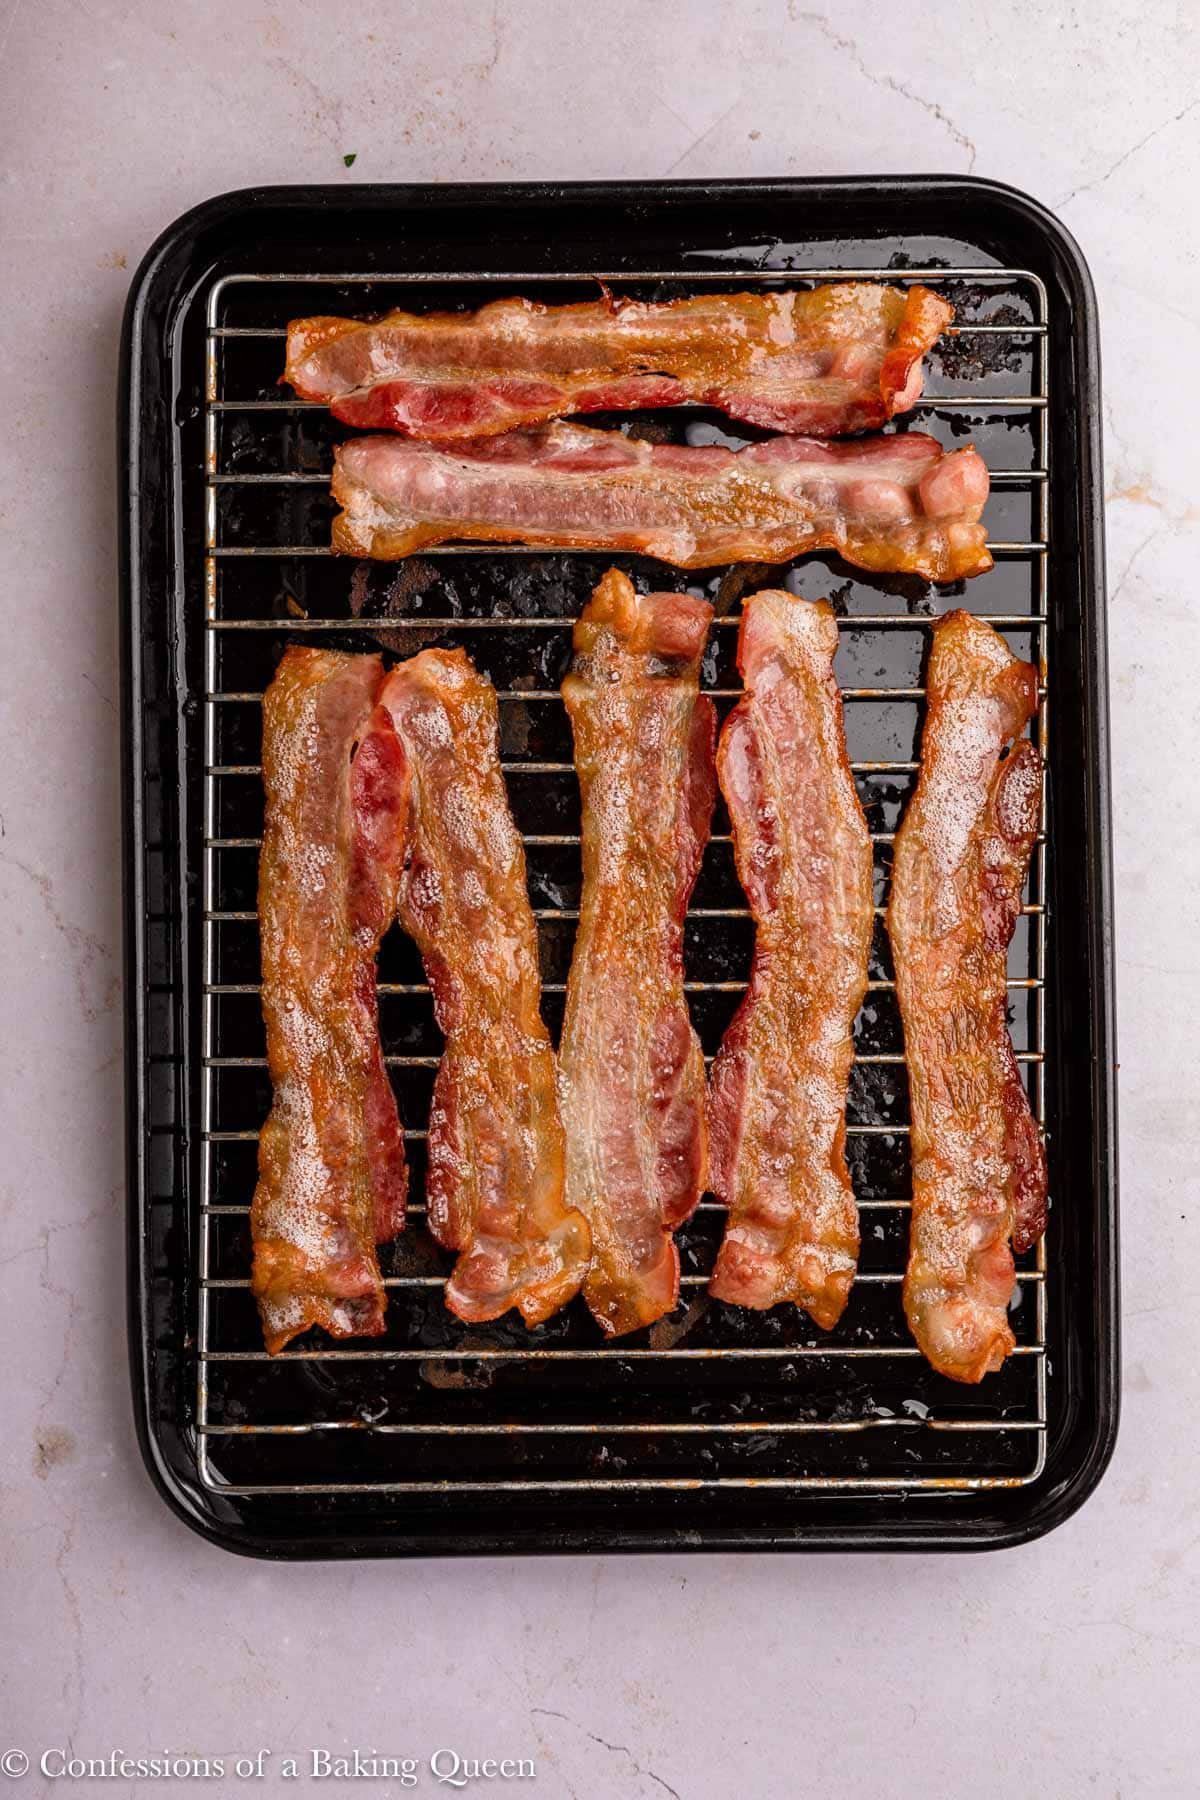 bacon cooked on a wire rack on top of a black tray on a light surface.